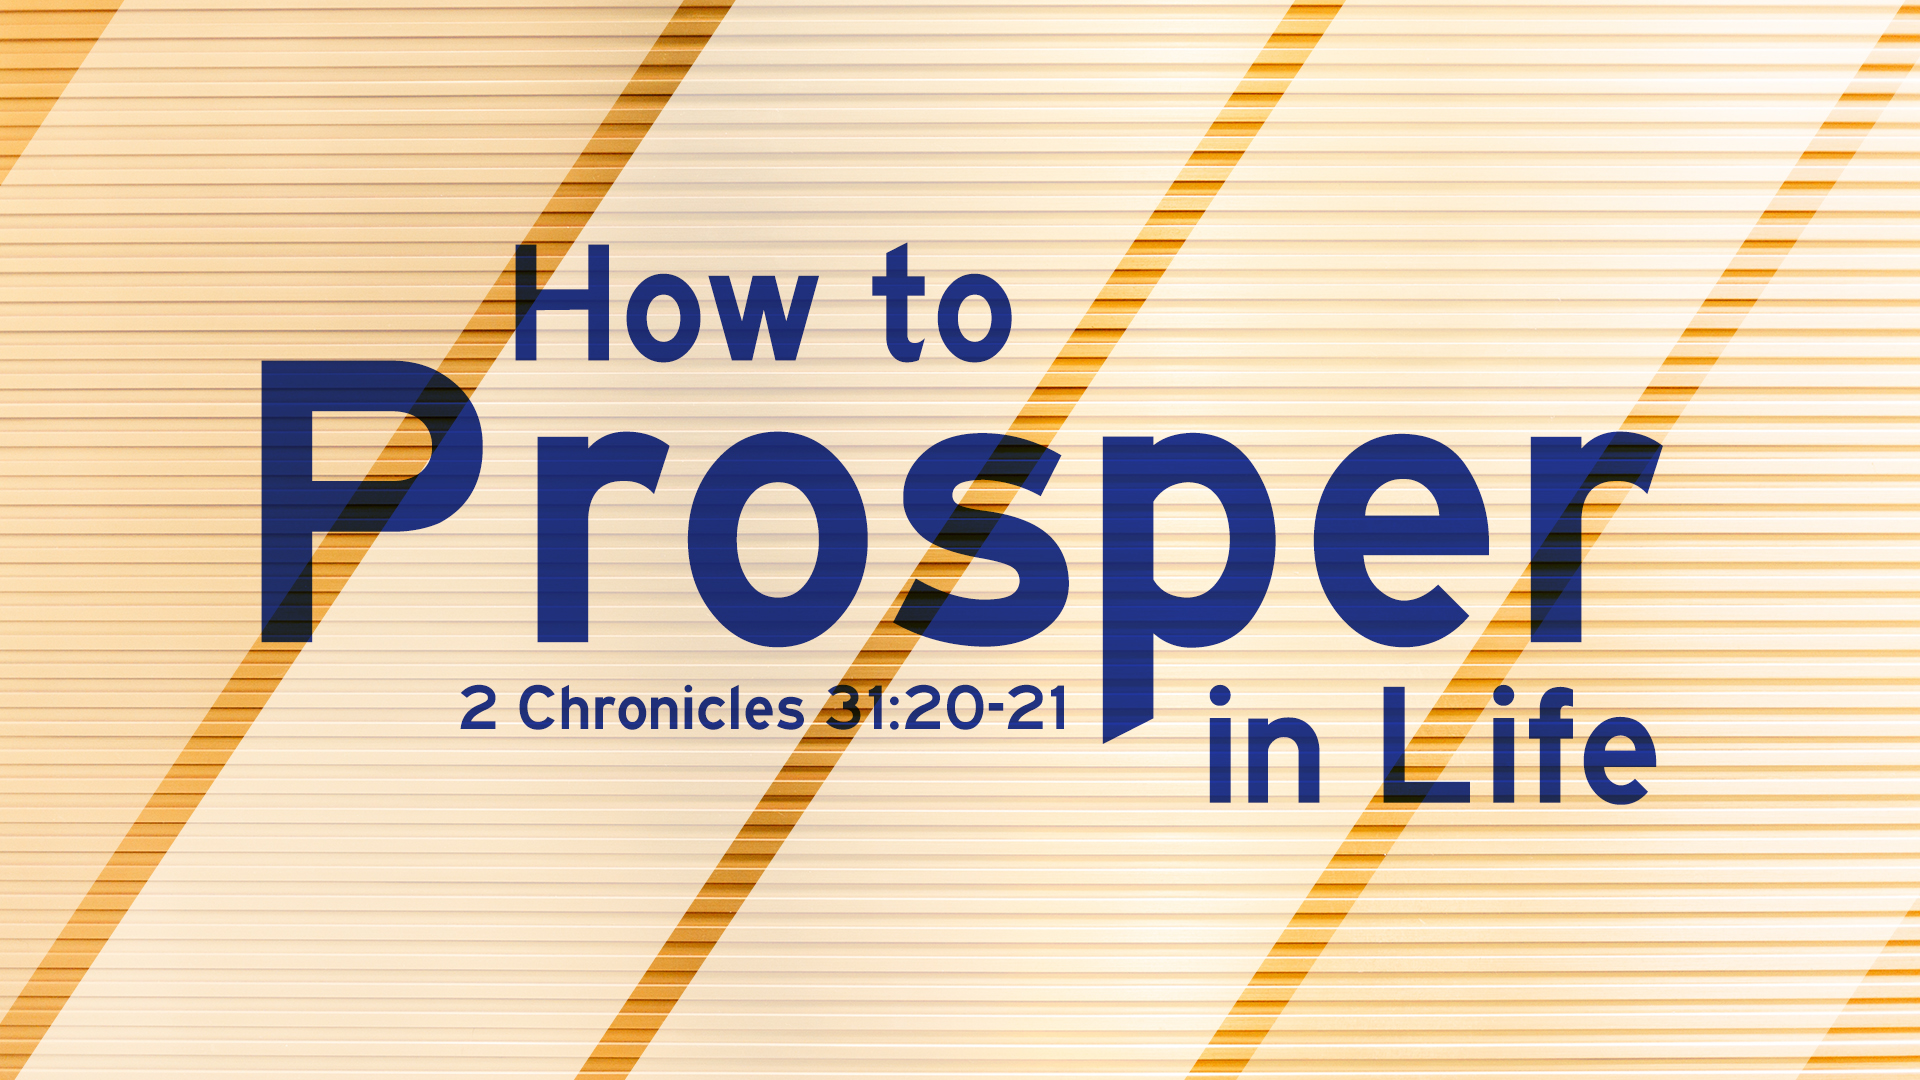 How to Prosper in Life